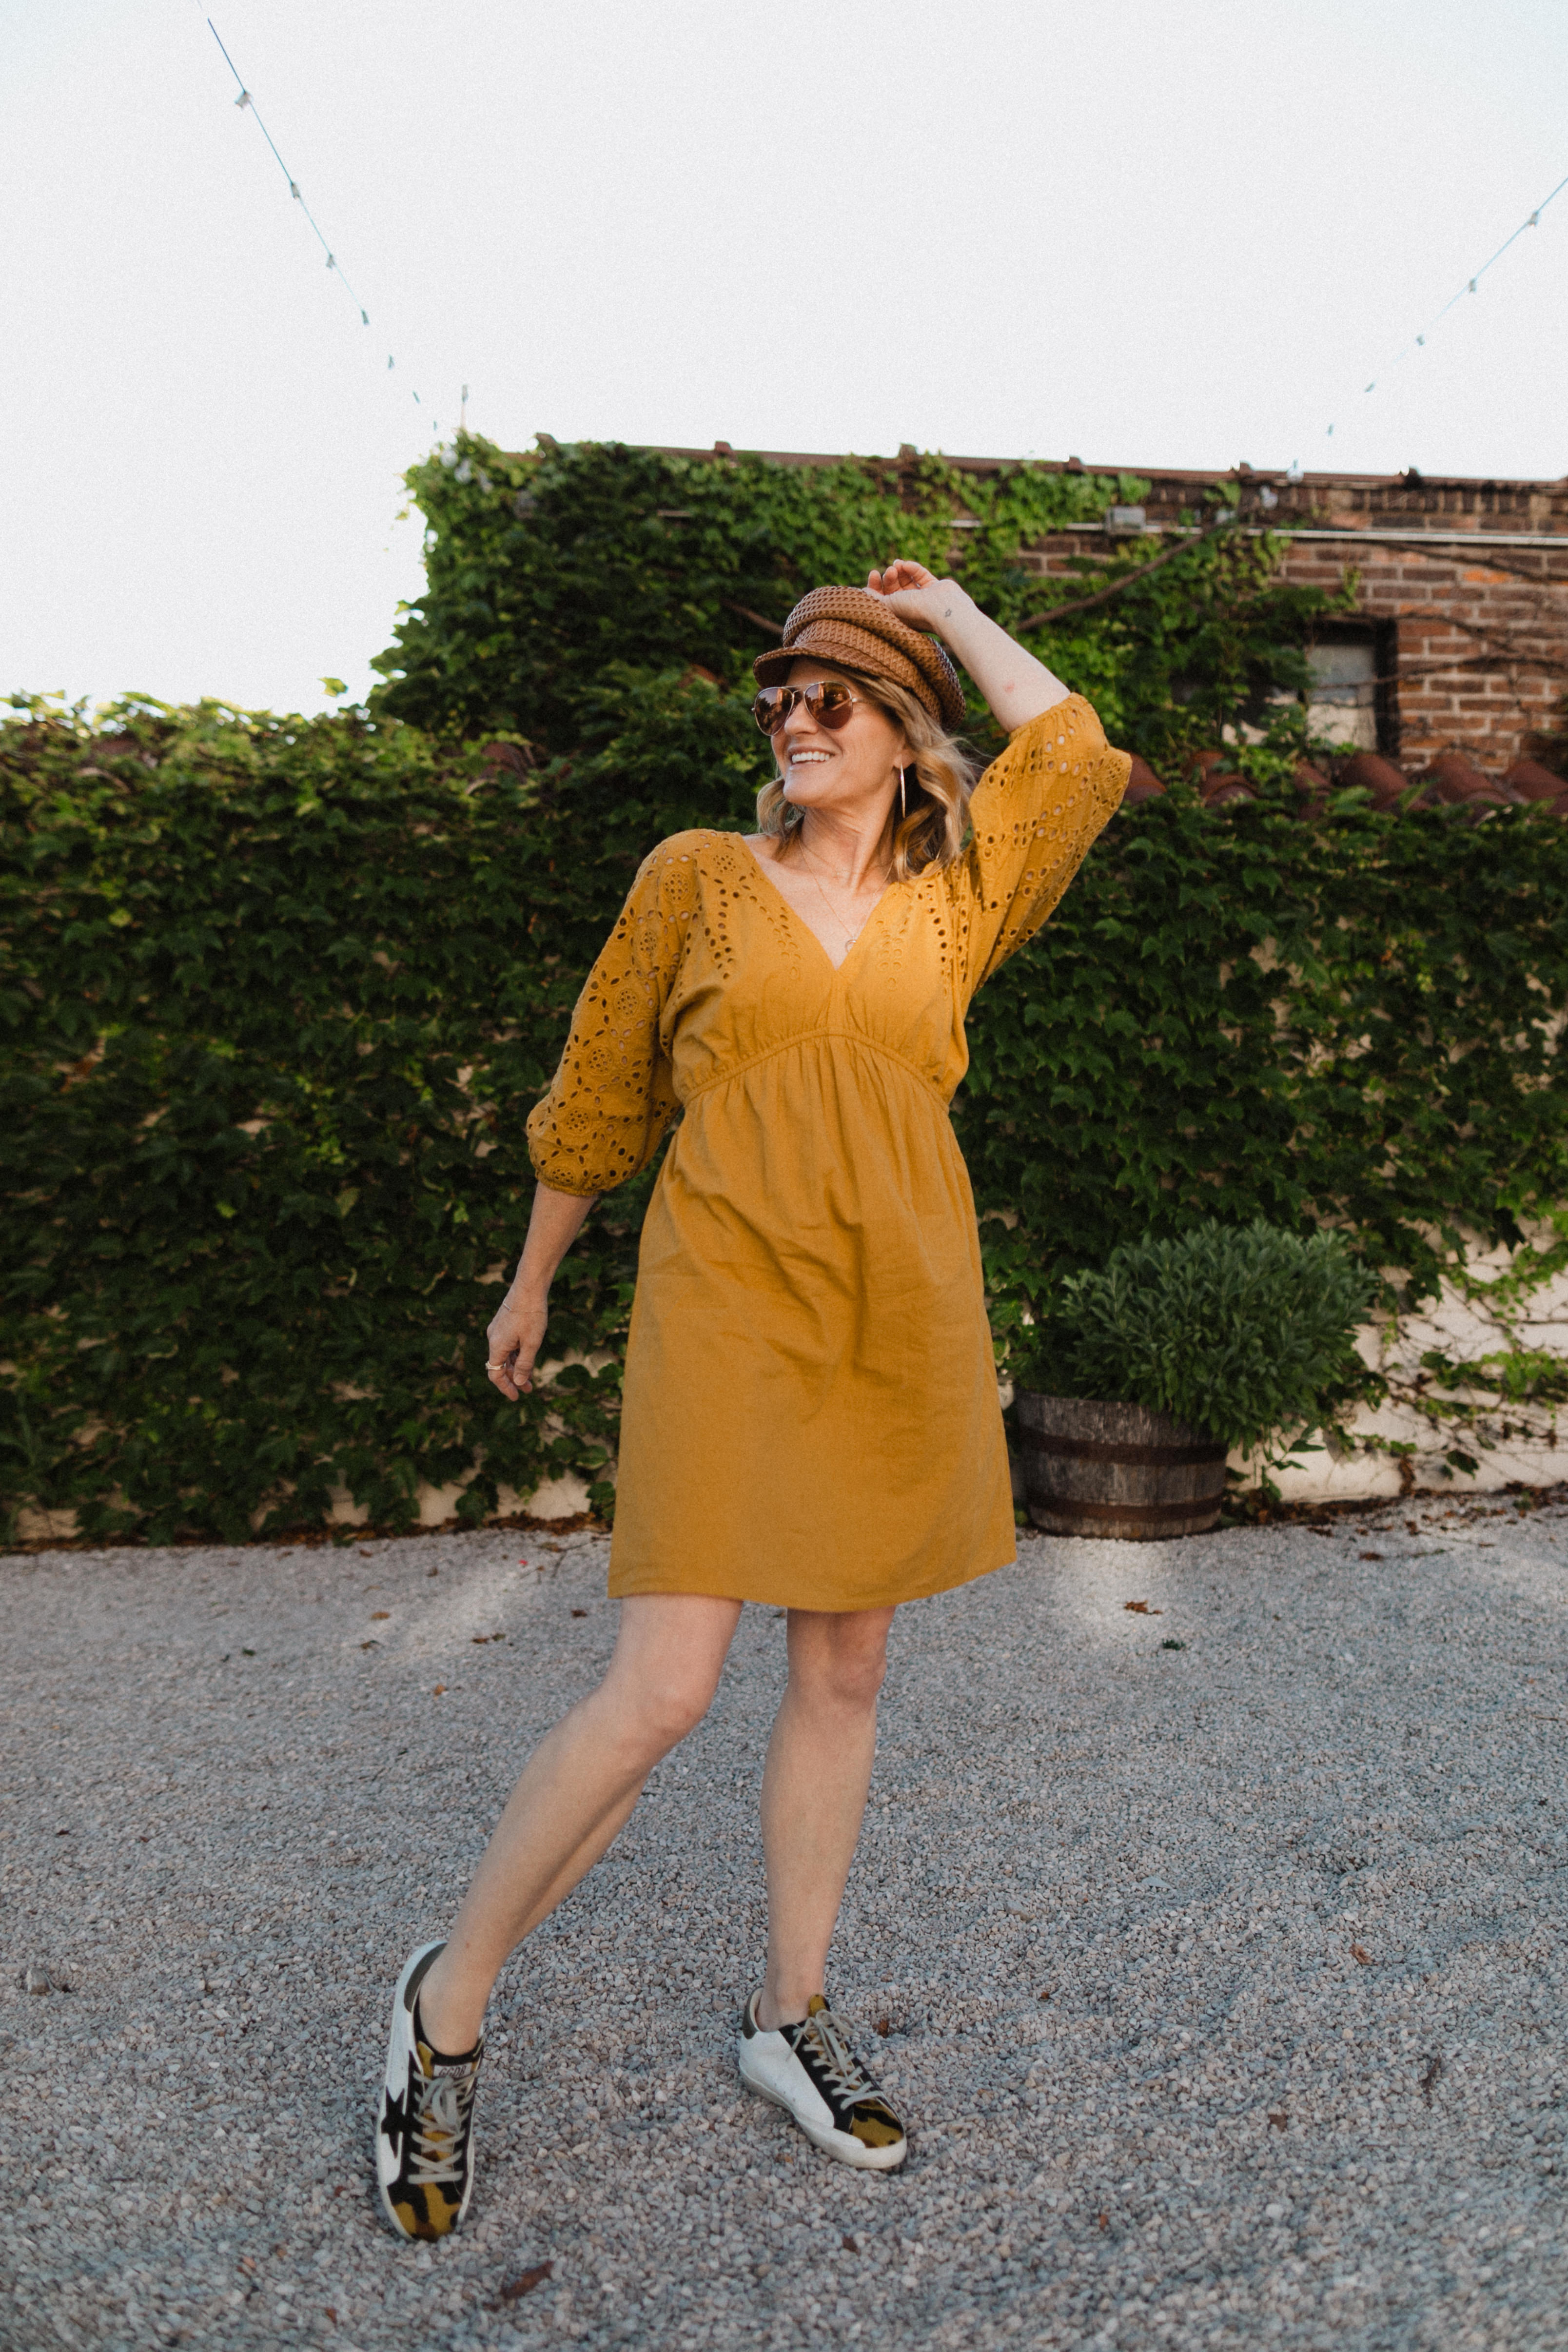 Lovestitch Clothing: 7 Outfits To Wear This Summer | summer dress outfits | summer dress with sneakers | summer dress sundress | eyelet dress outfit | eyelet dress outfit summer | dress with sneakers outfit | dress with sneakers casual | Oh Darling Blog